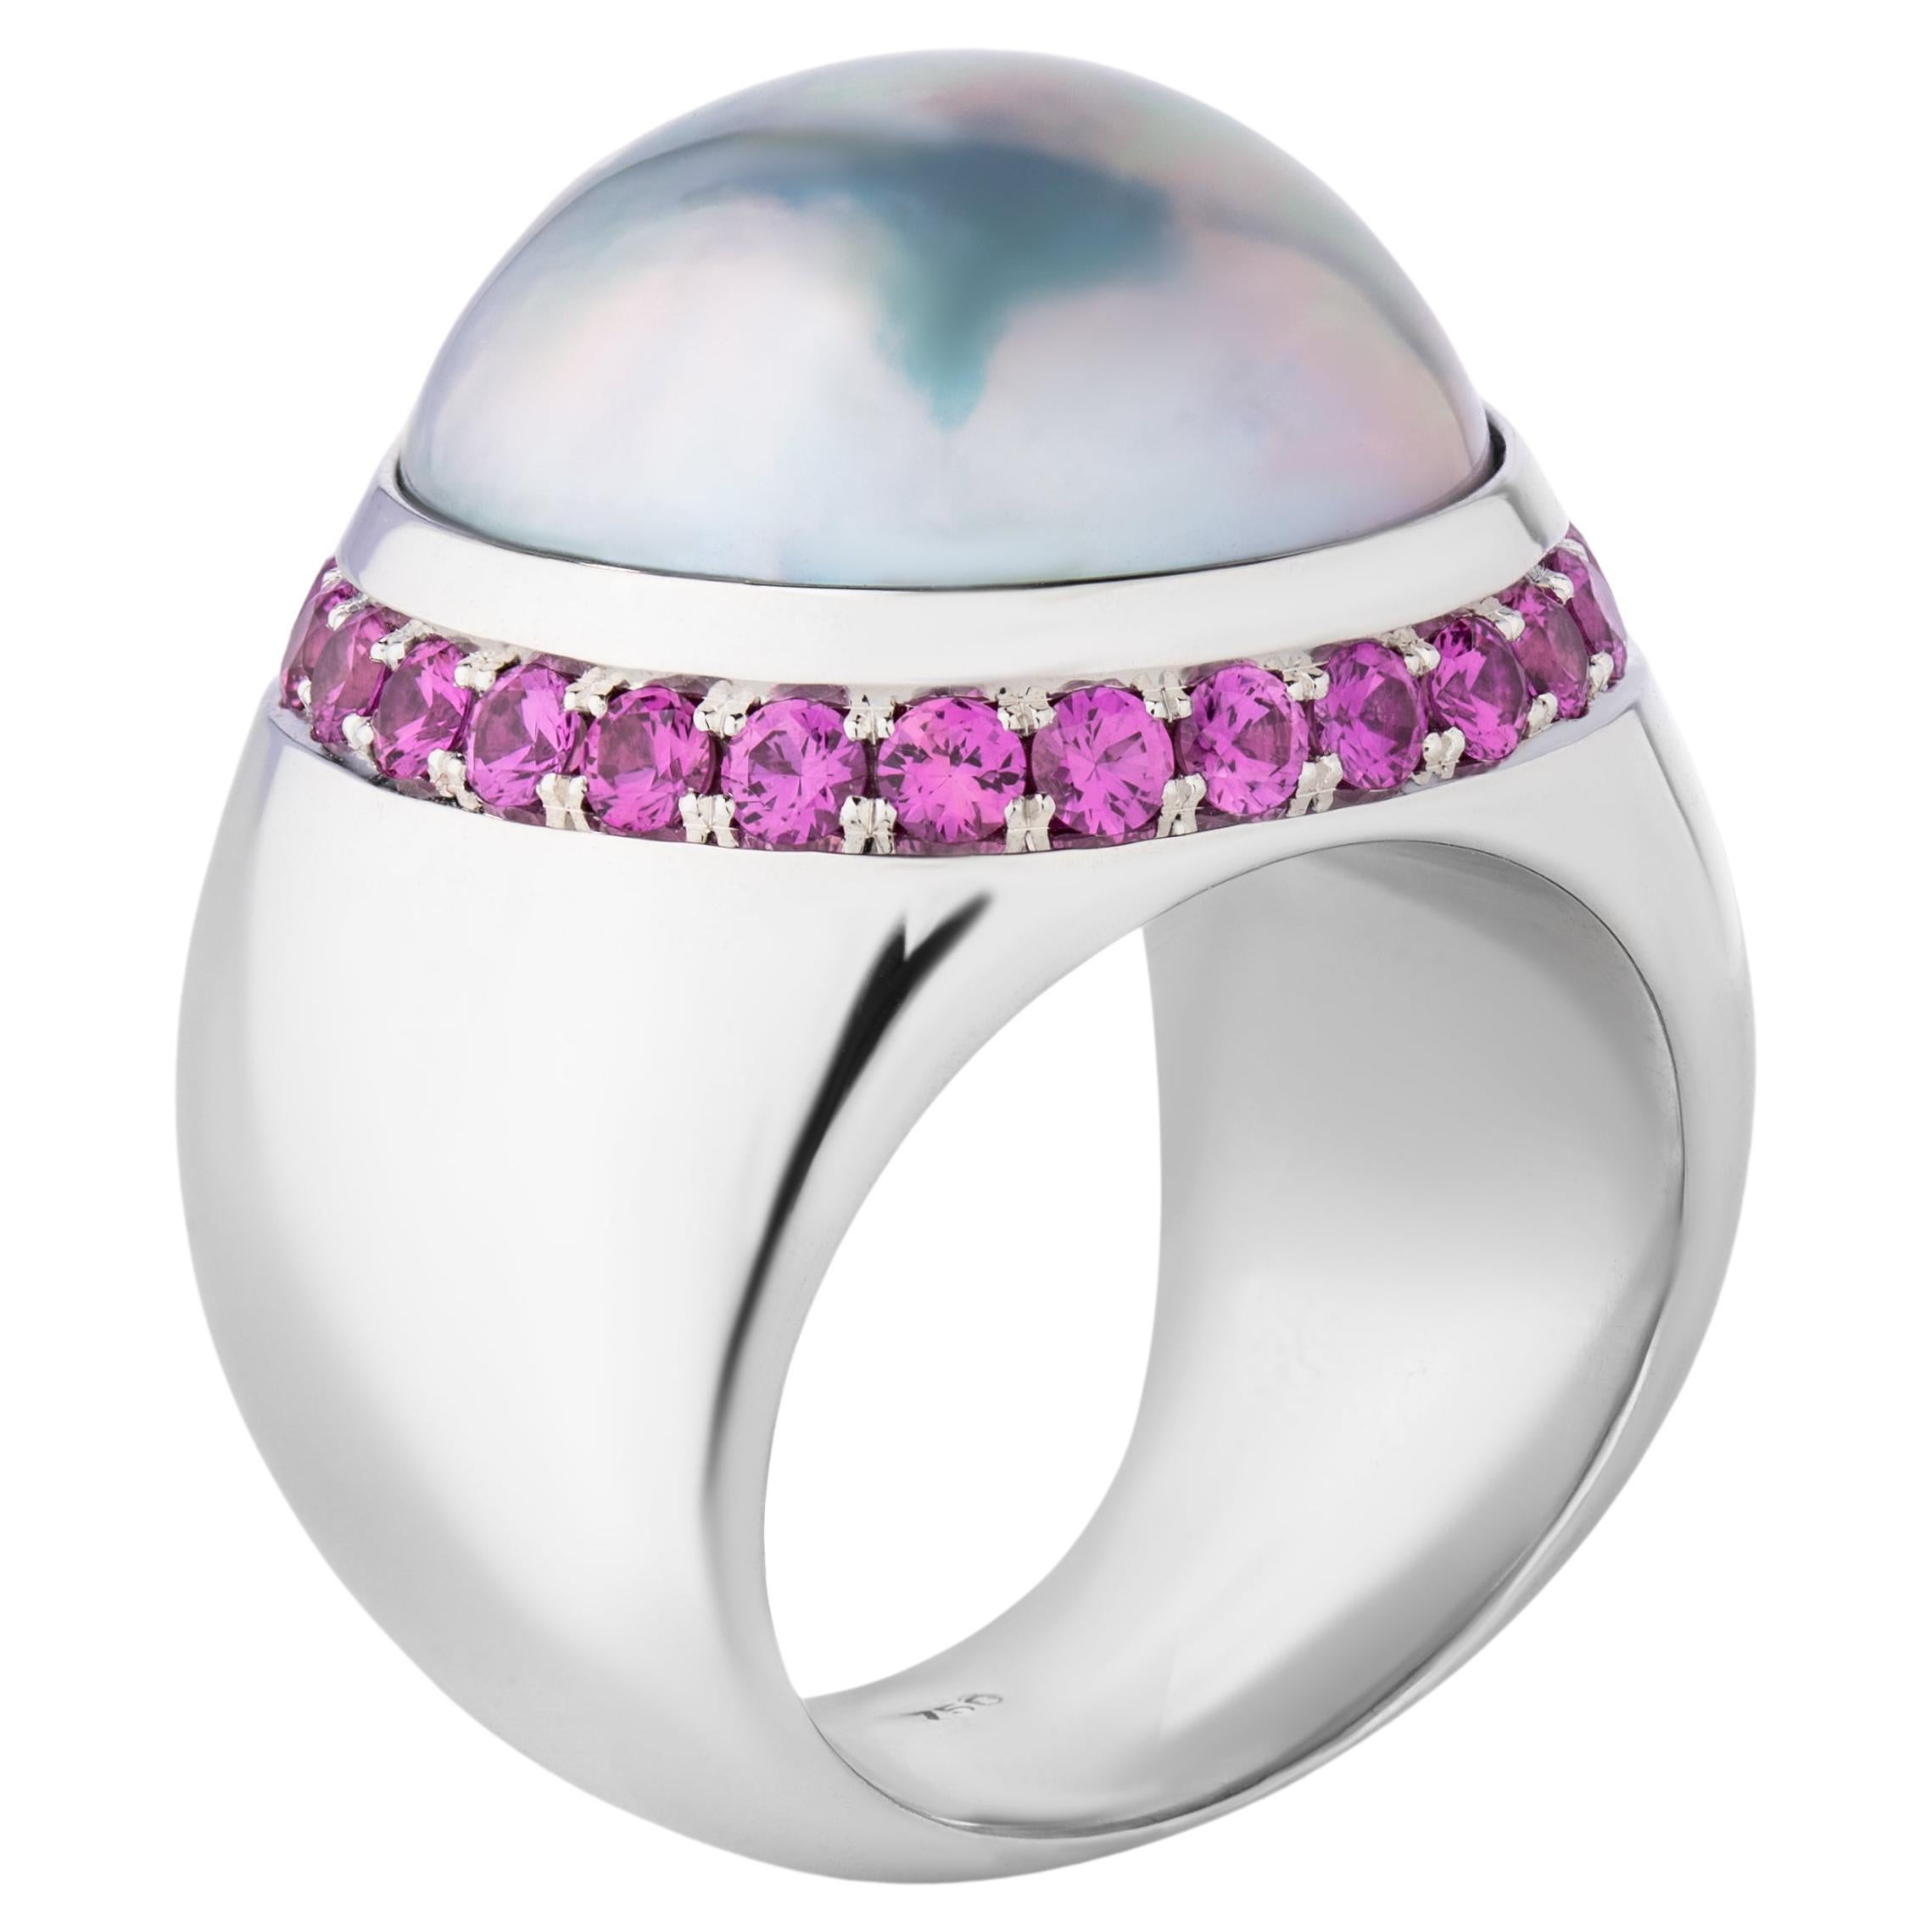 Luxurious ring made of 18 carat white gold, a large mabé pearl 19,40 mm / 0.764 inches surrounded by 26 pink Saphires with a total of 1.92 carats.
The huge mabé pearl with a very good luster and its beautiful iridescence as the centerpiece is